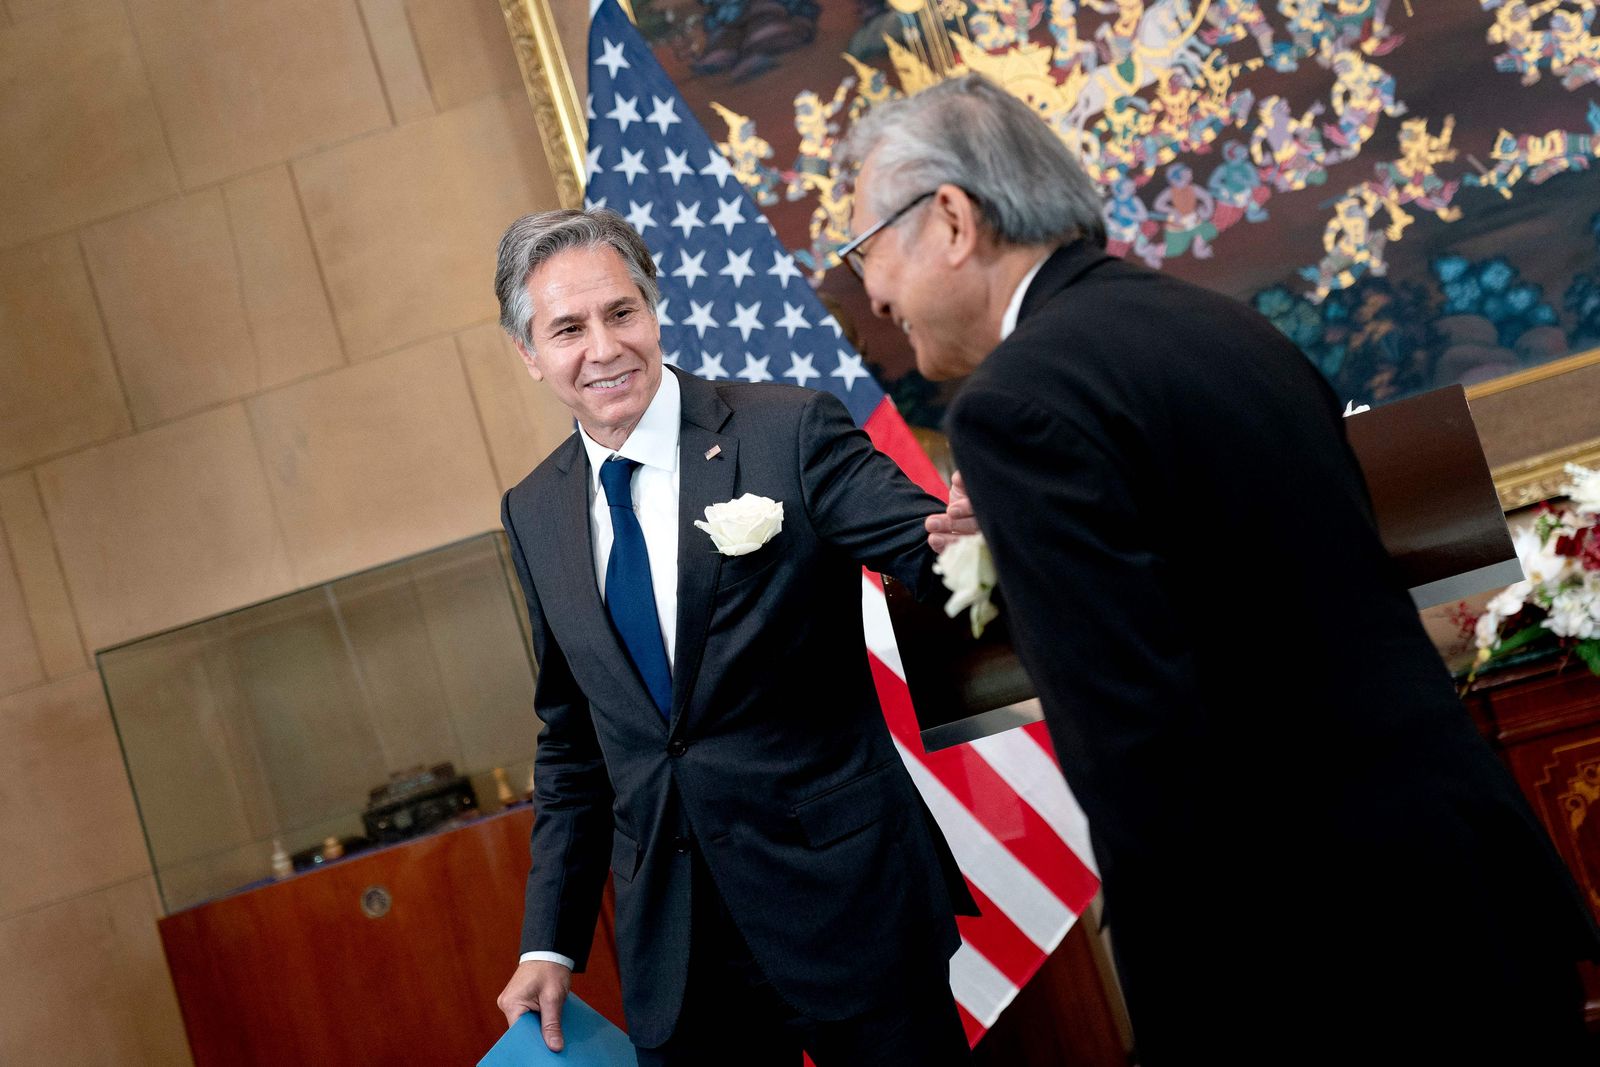 US Secretary of State Antony Blinken (L) and Thailand's Foreign Minister Don Pramudwinai depart after a press conference following a Memorandum of Understanding signing ceremony at the Thai Ministry of Foreign Affairs in Bangkok on July 10, 2022. (Photo by Stefani Reynolds / POOL / AFP) - AFP